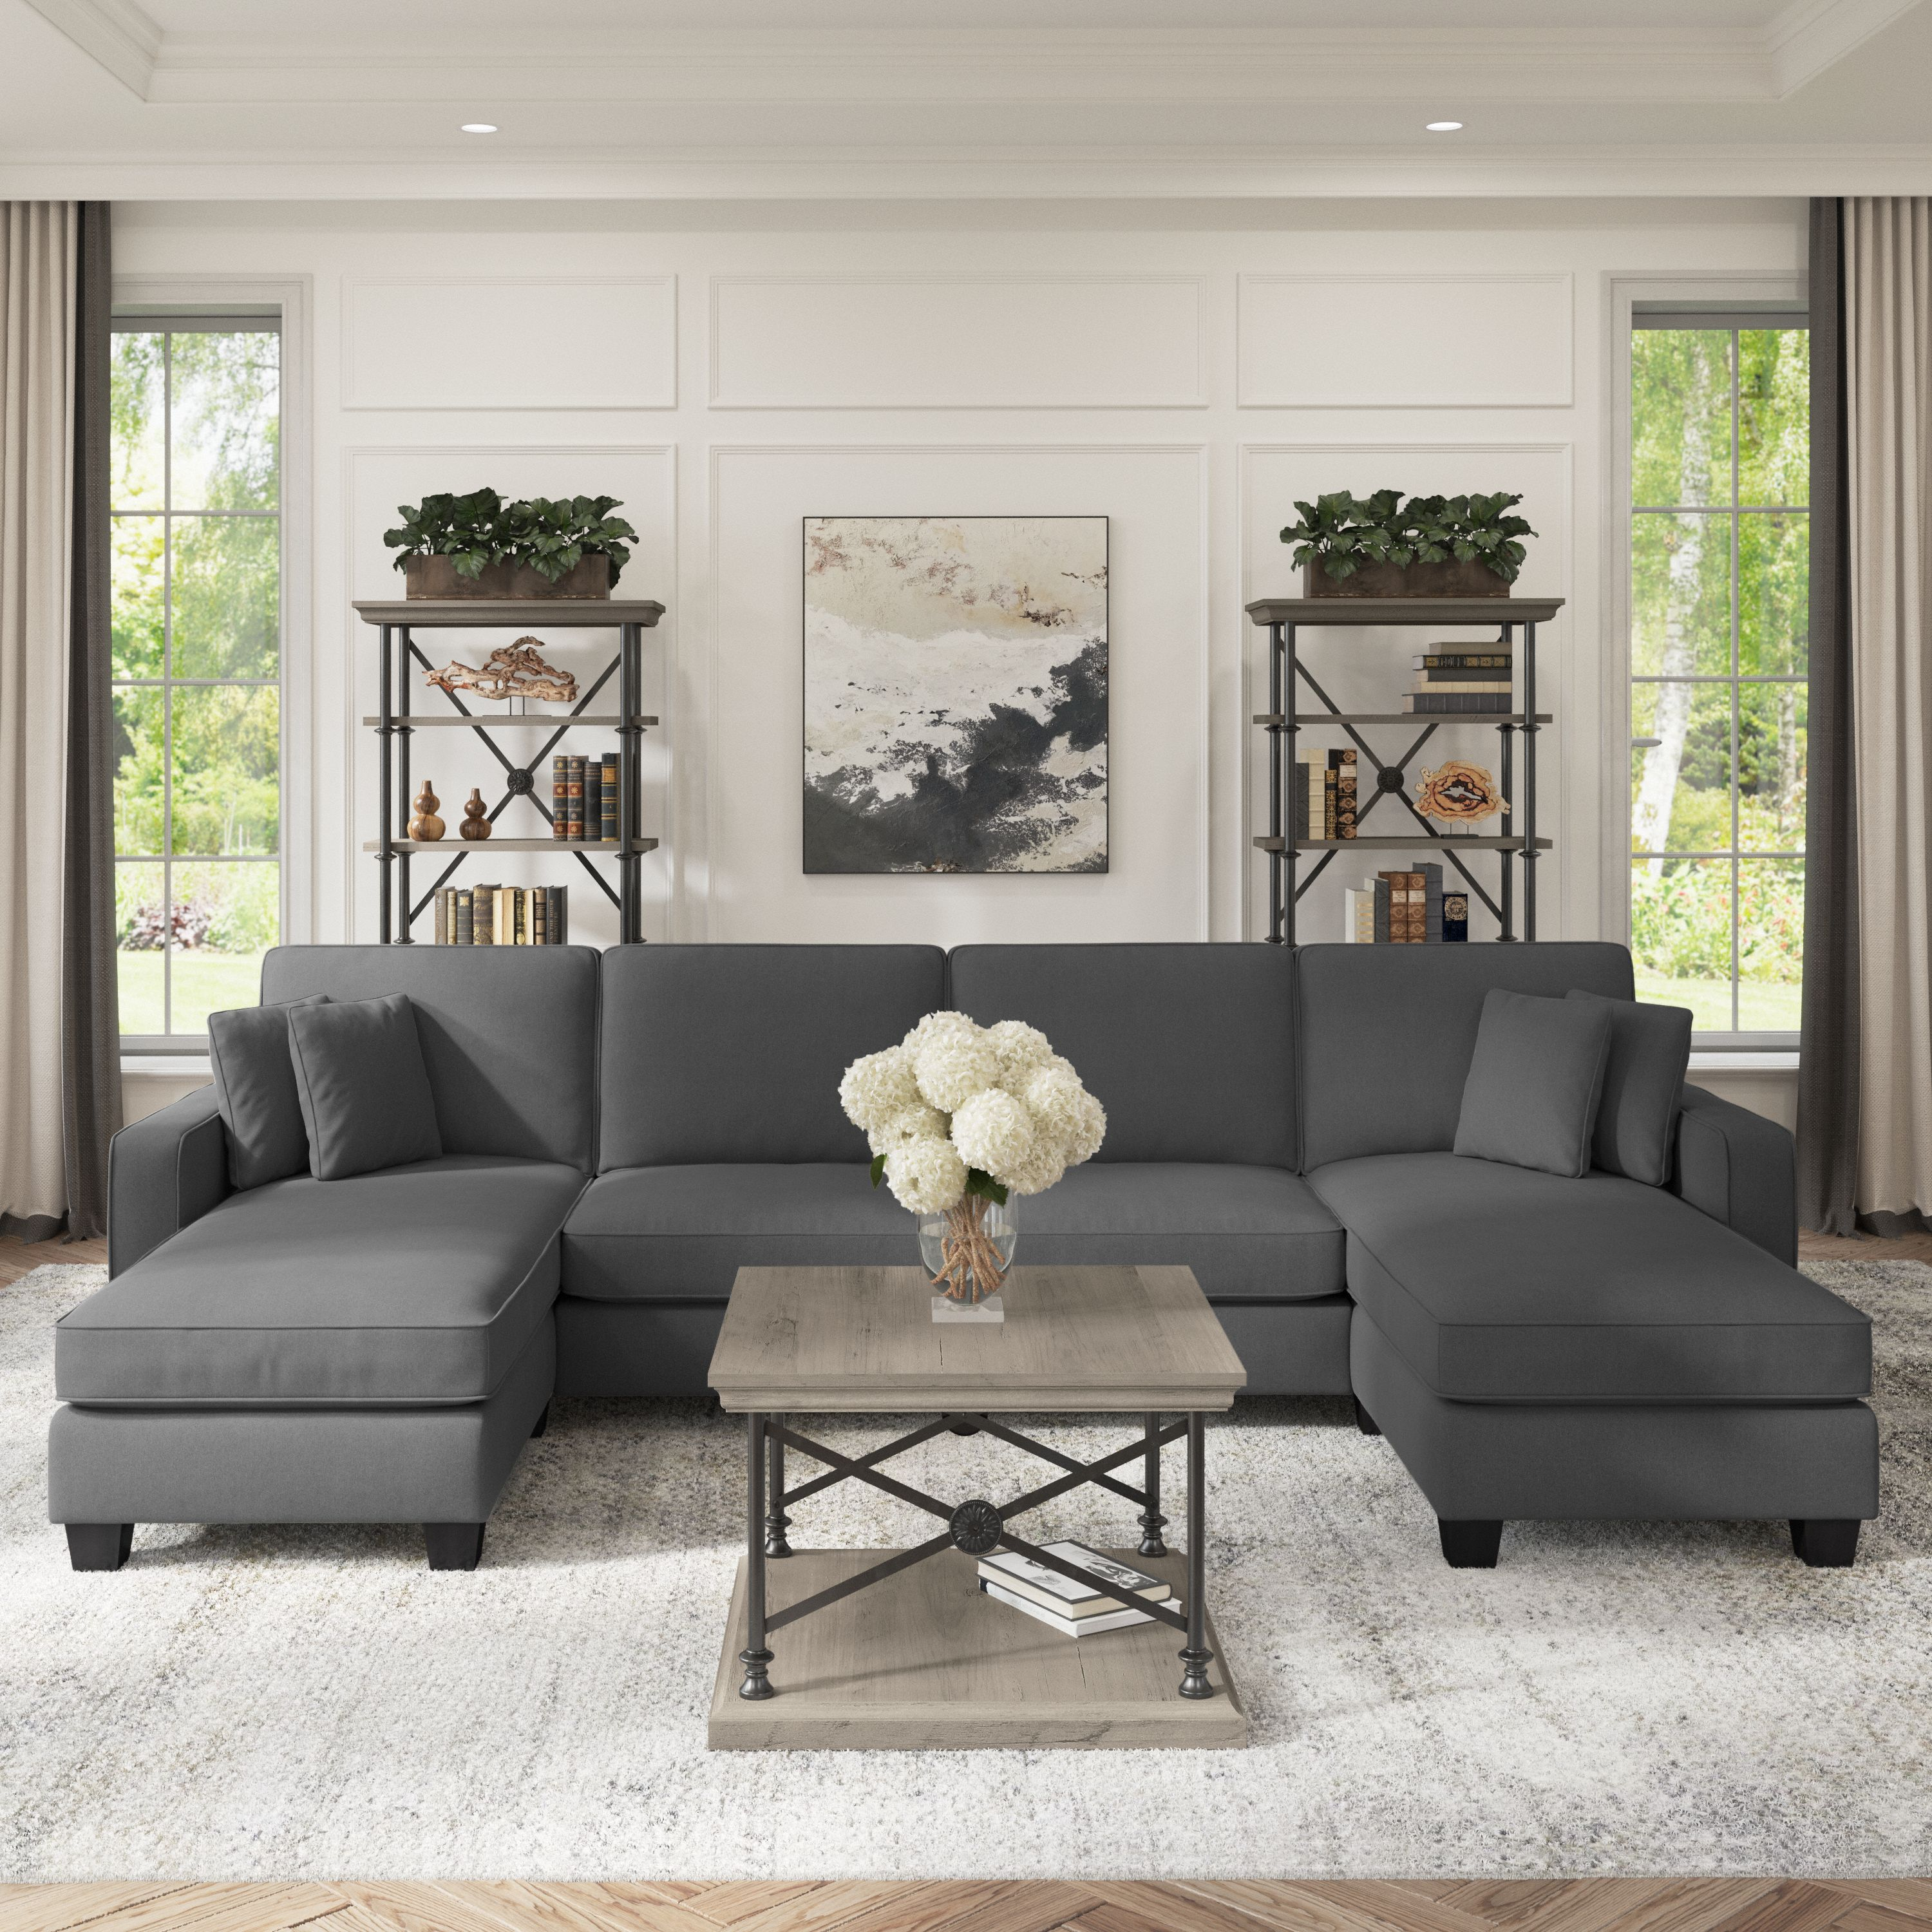 Shop Bush Furniture Stockton 131W Sectional Couch with Double Chaise Lounge 01 SNY130SCGH-03K #color_charcoal gray herringbone fabr